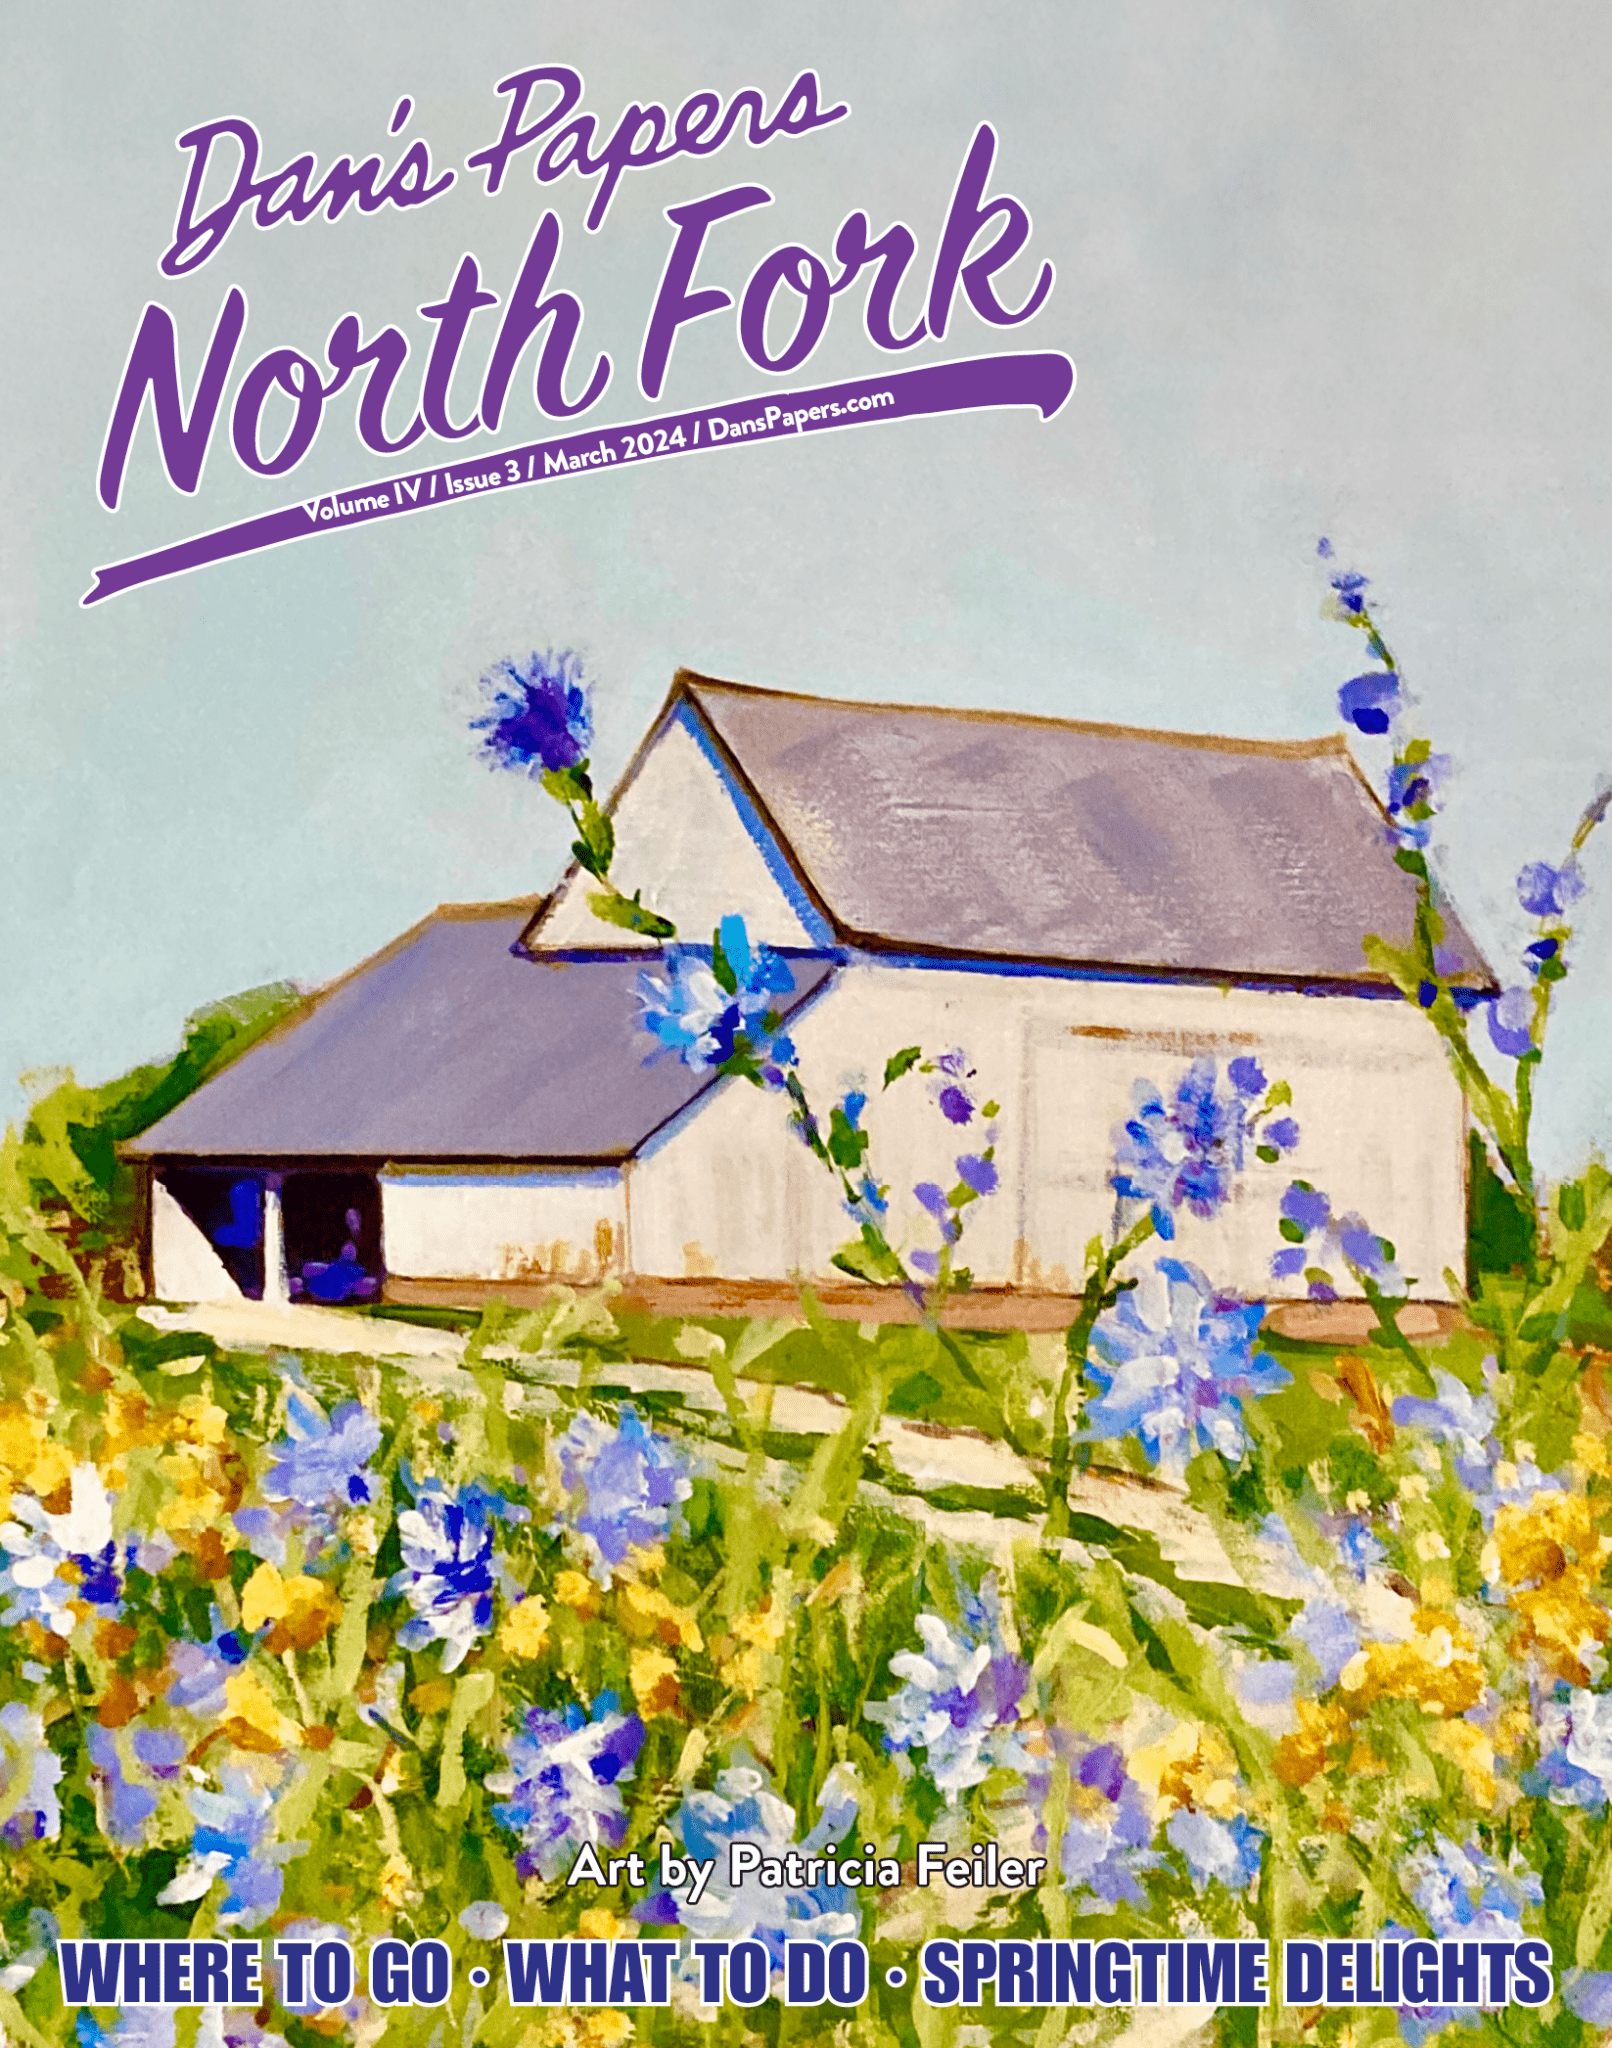 March 2024 Dan's Papers North Fork cover art by Patricia Feiler